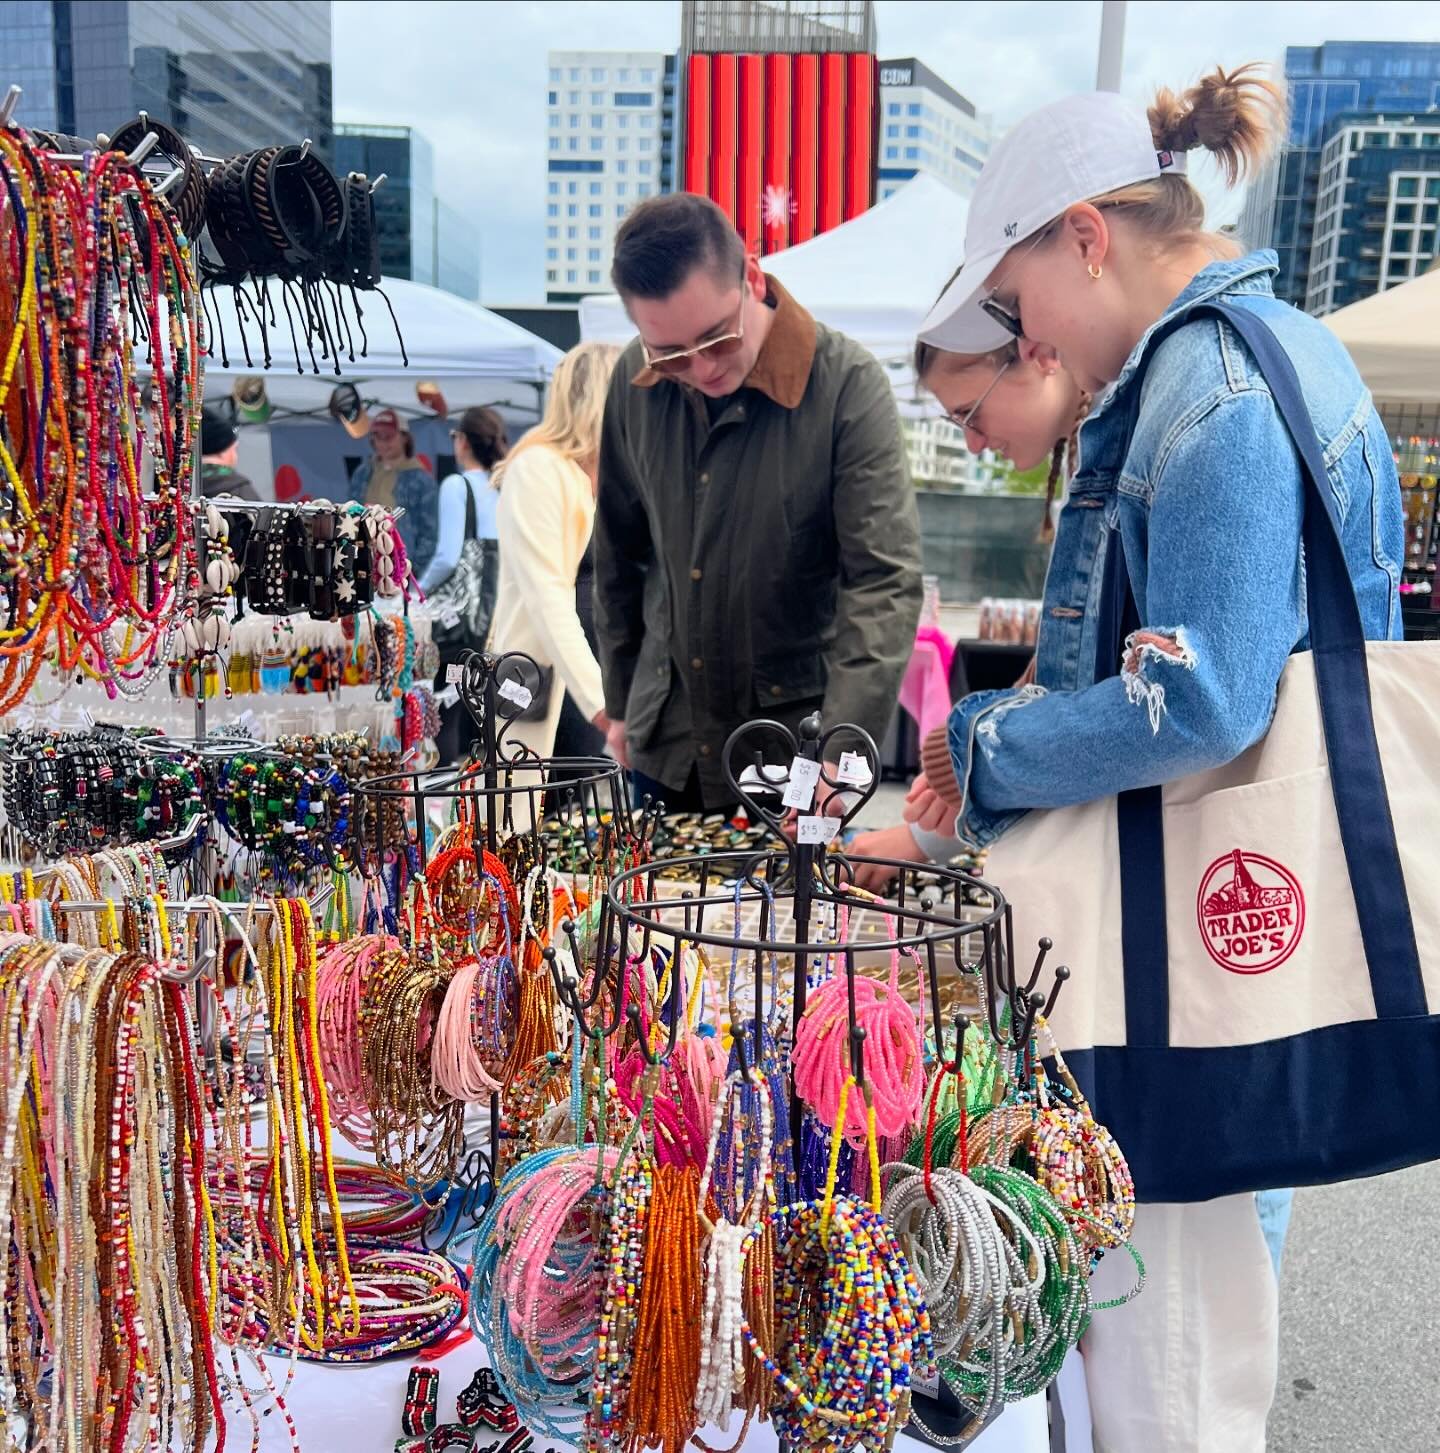 🌺🌸It&rsquo;s a beautiful day in @seaportbos at Seaport Summer Market! Make sure you pick up Mom something special today, we&rsquo;re here and at @citypointbklyn until 7pm! 

✨🌞Seaport Summer Market🌊✨
🗓 Sat - Sun, May 11-June 30, Aug 24- Sept 21
